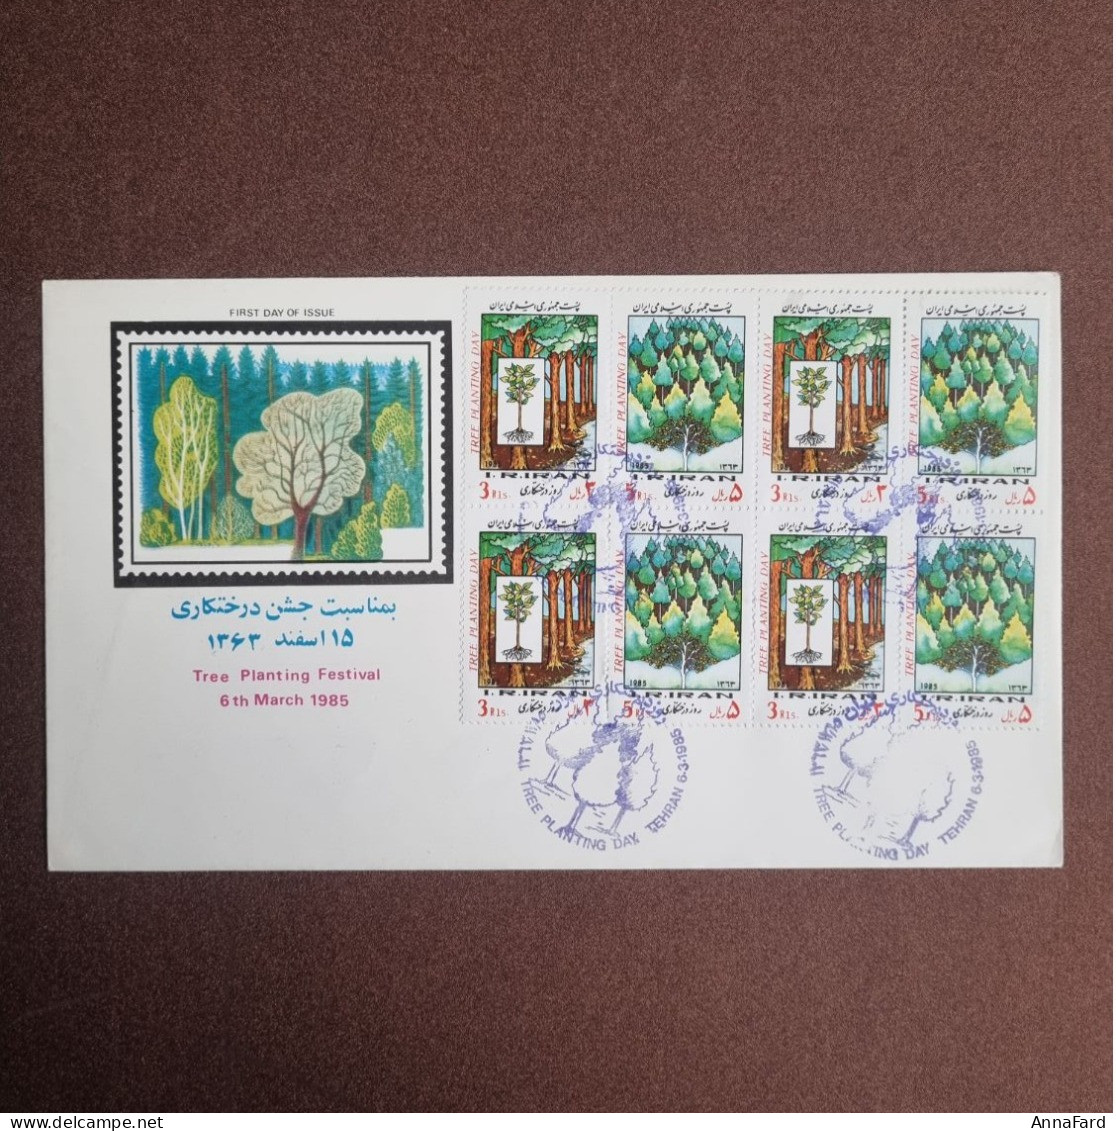 1985 Iran Tree Planting Day Fdc Franked With Block Of 4 Scott No: 2173-74 - Iran